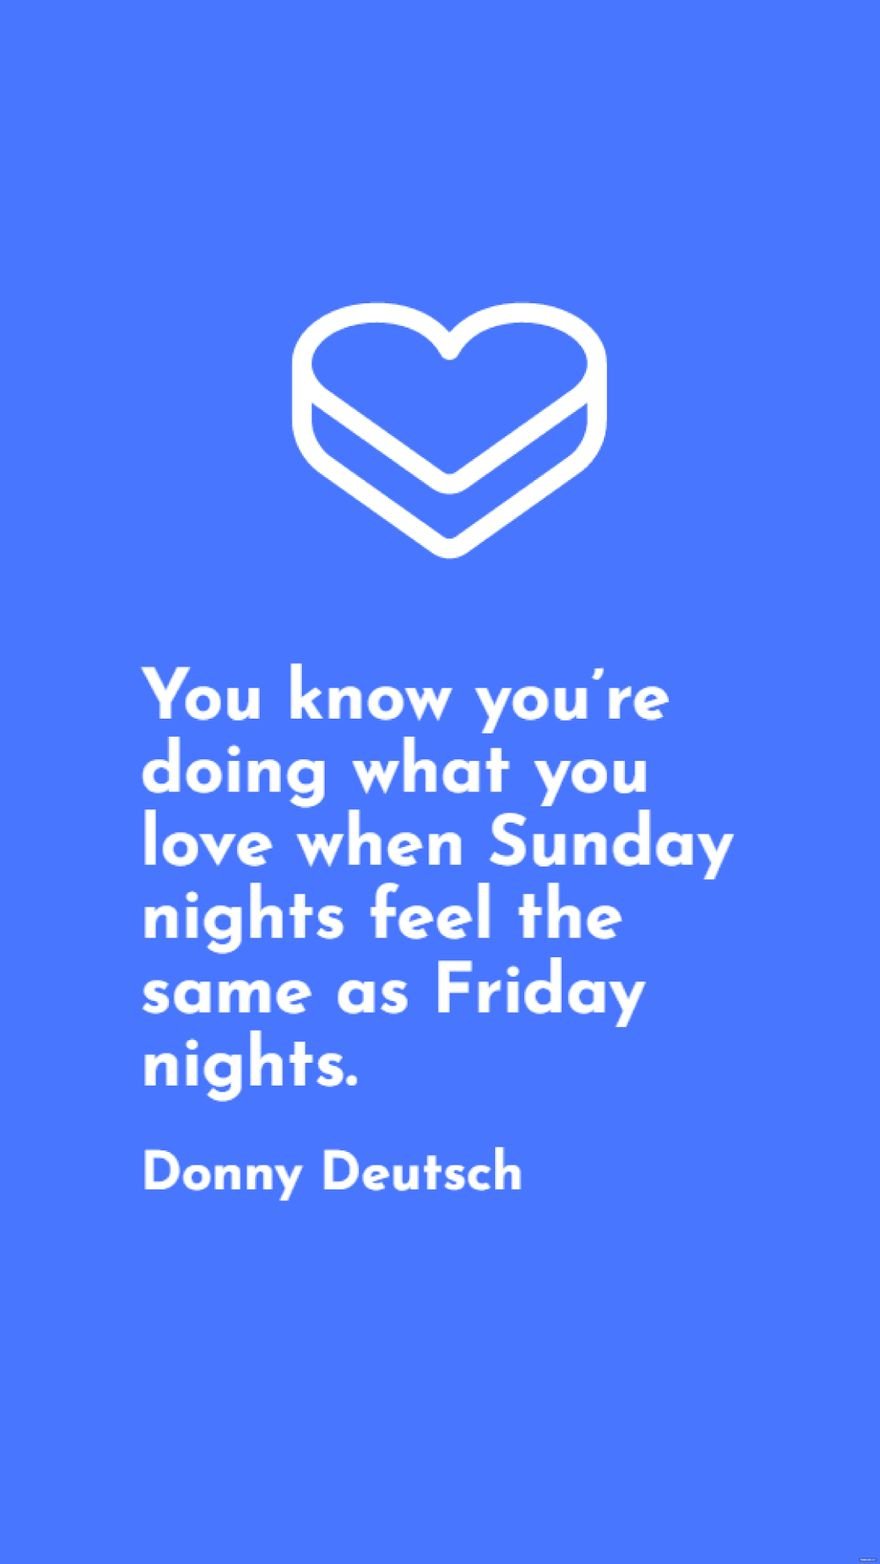 Donny Deutsch - You know you’re doing what you love when Sunday nights feel the same as Friday nights.